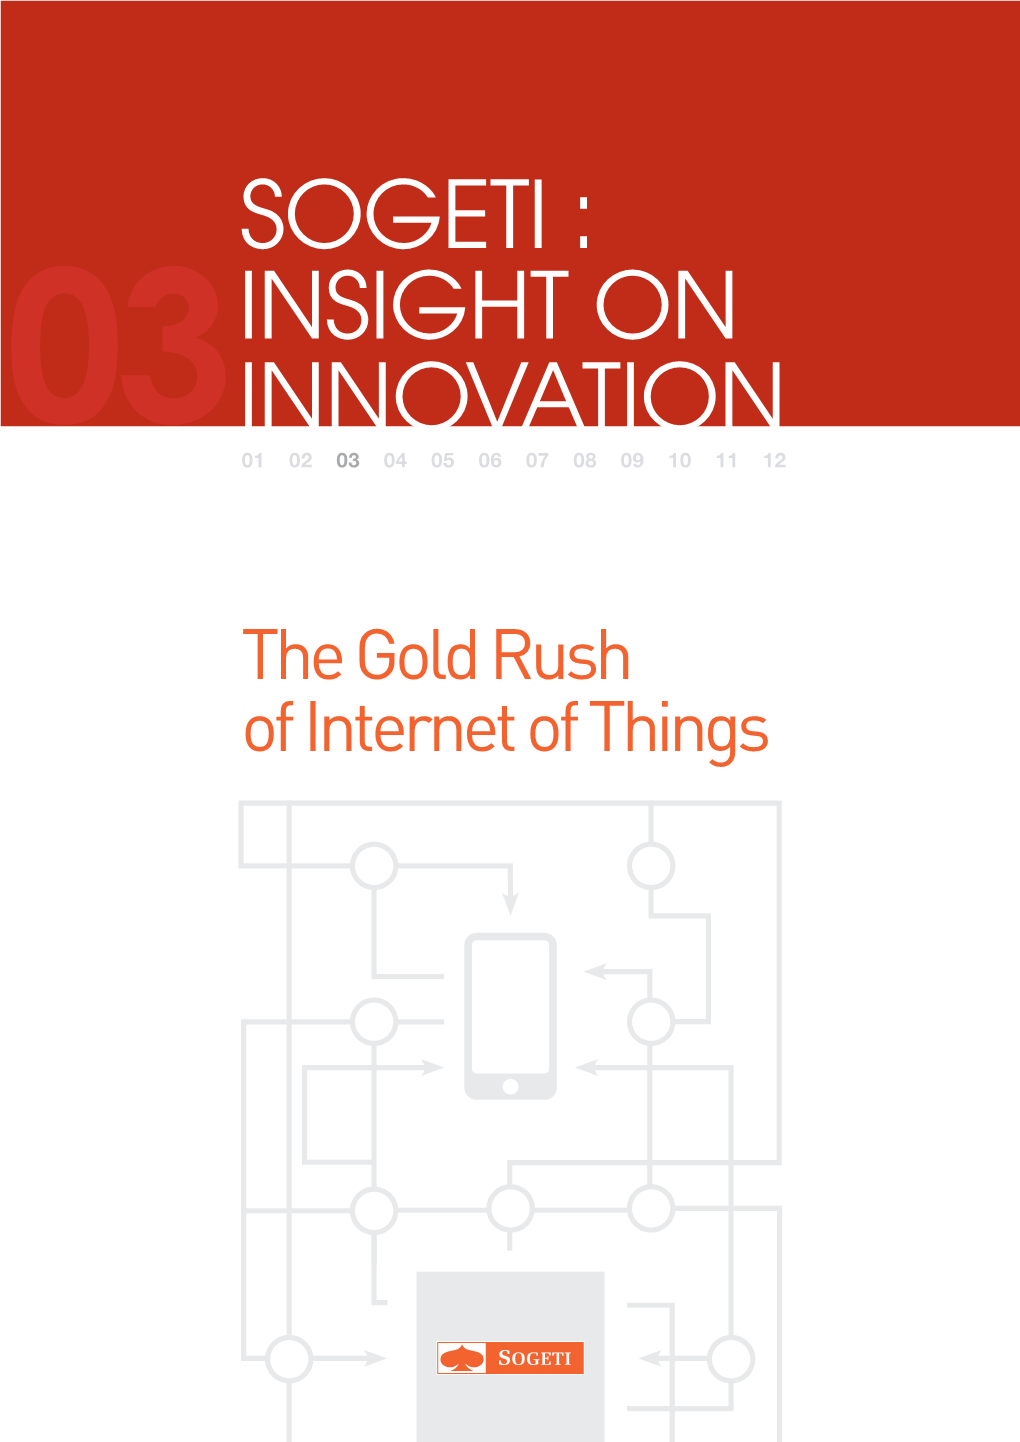 The Gold Rush of Internet of Things